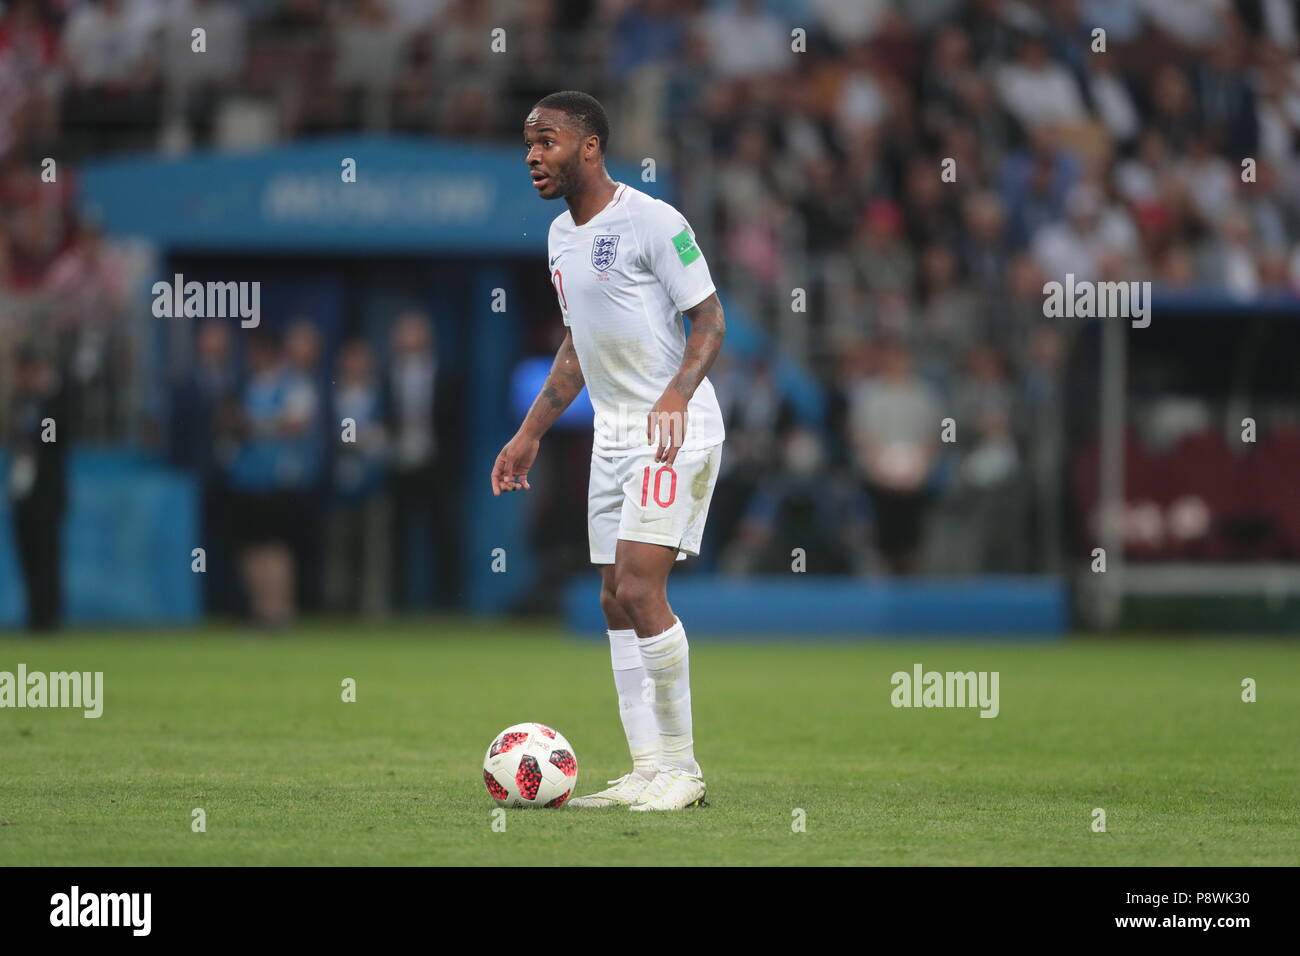 FIFA World Cup Russia 2018. Semifinals. Croatia vs England at Luzniki Stadium. English Raheem Sterling during the match. July 11, 2018. Russia, Moscow. Photo credit: Vasily Ponomorev/Kommersant Stock Photo